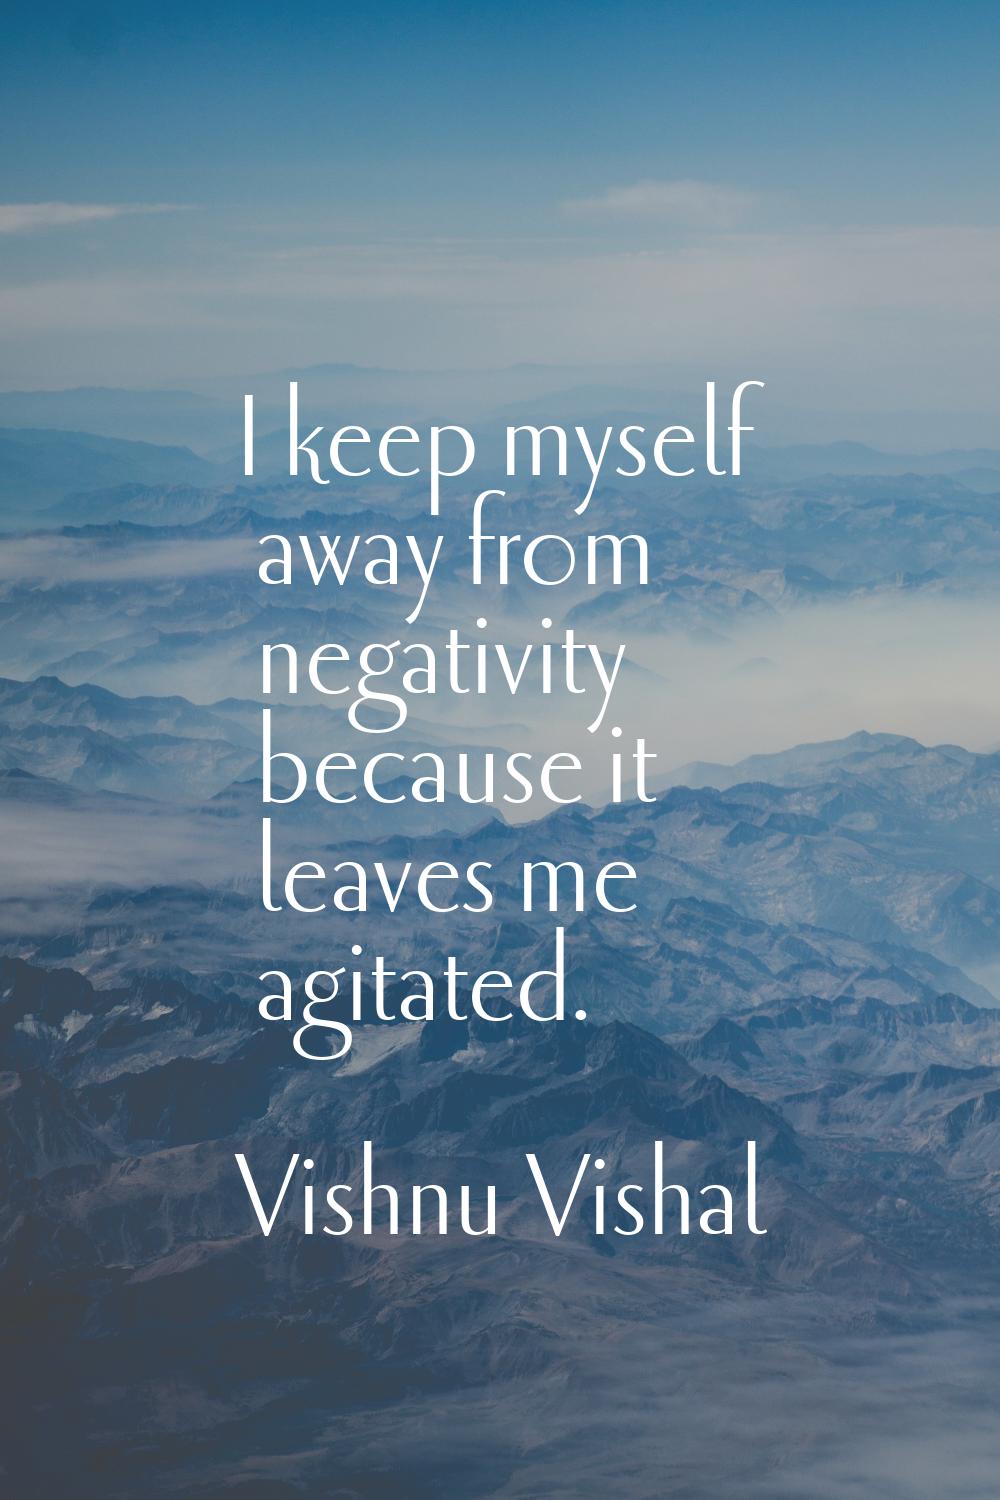 I keep myself away from negativity because it leaves me agitated.